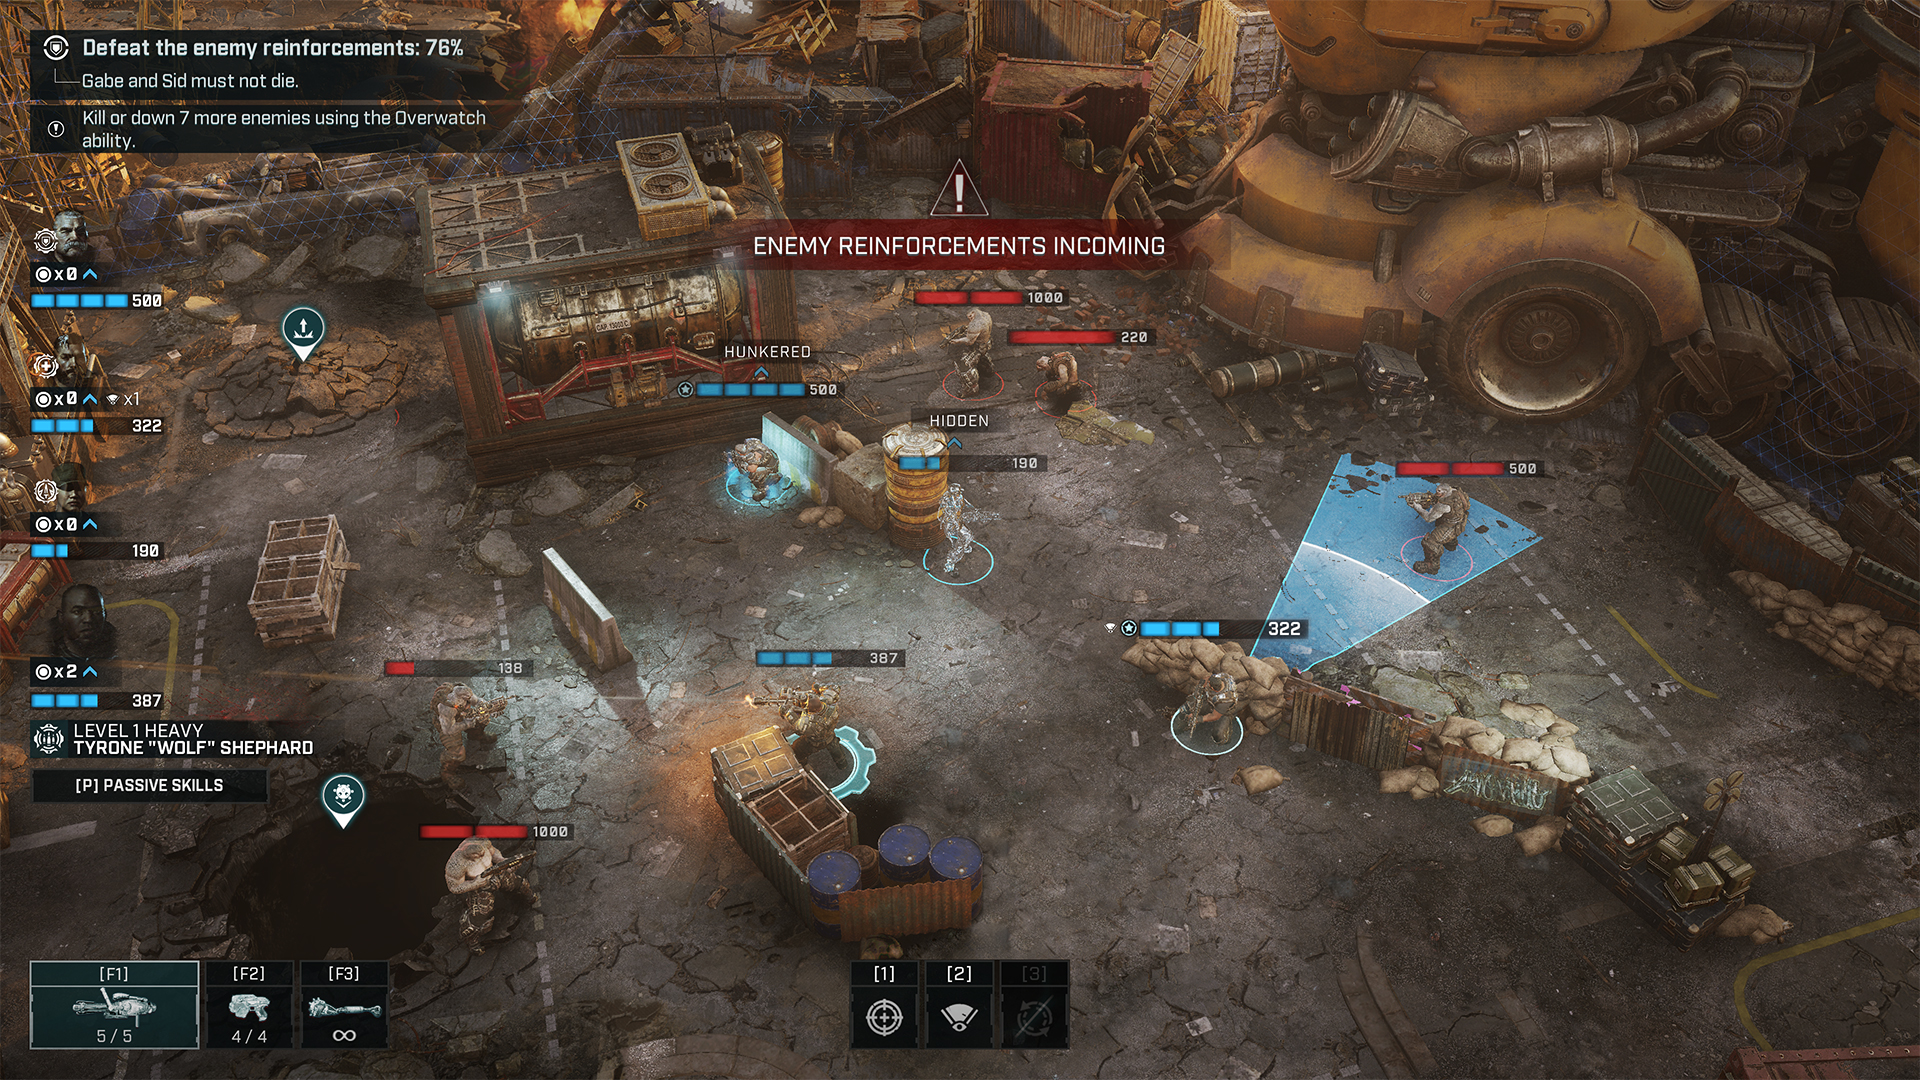 Is there Gears Tactics co-op? - GameRevolution